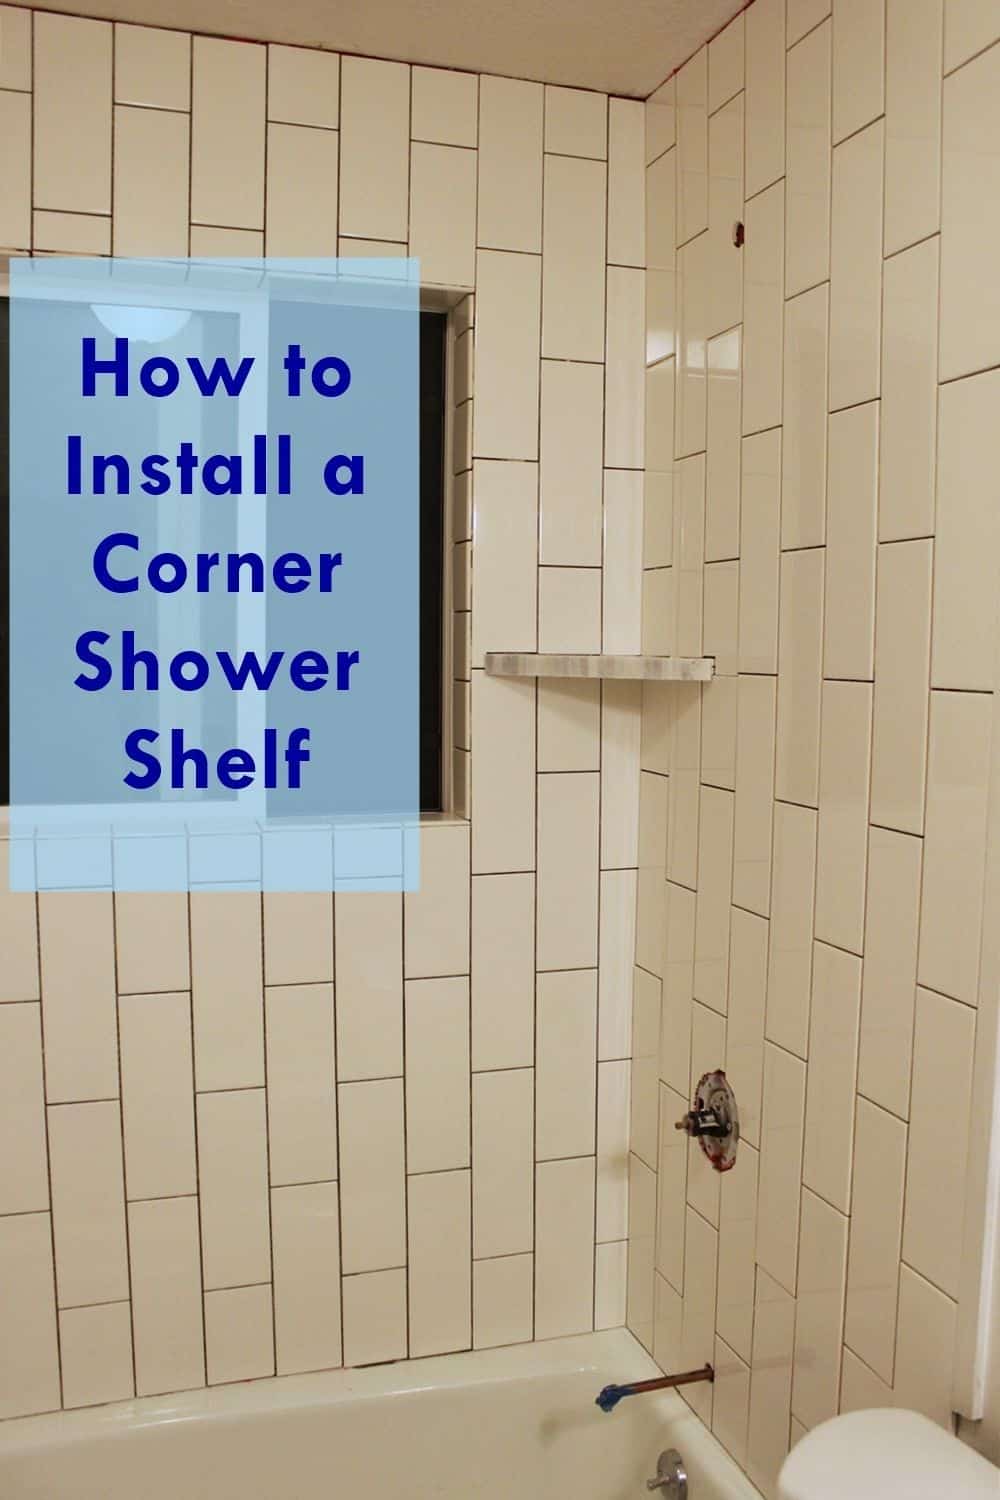 How To Make A Subway Tile Shower, What Do You Need To Install Tile In A Shower